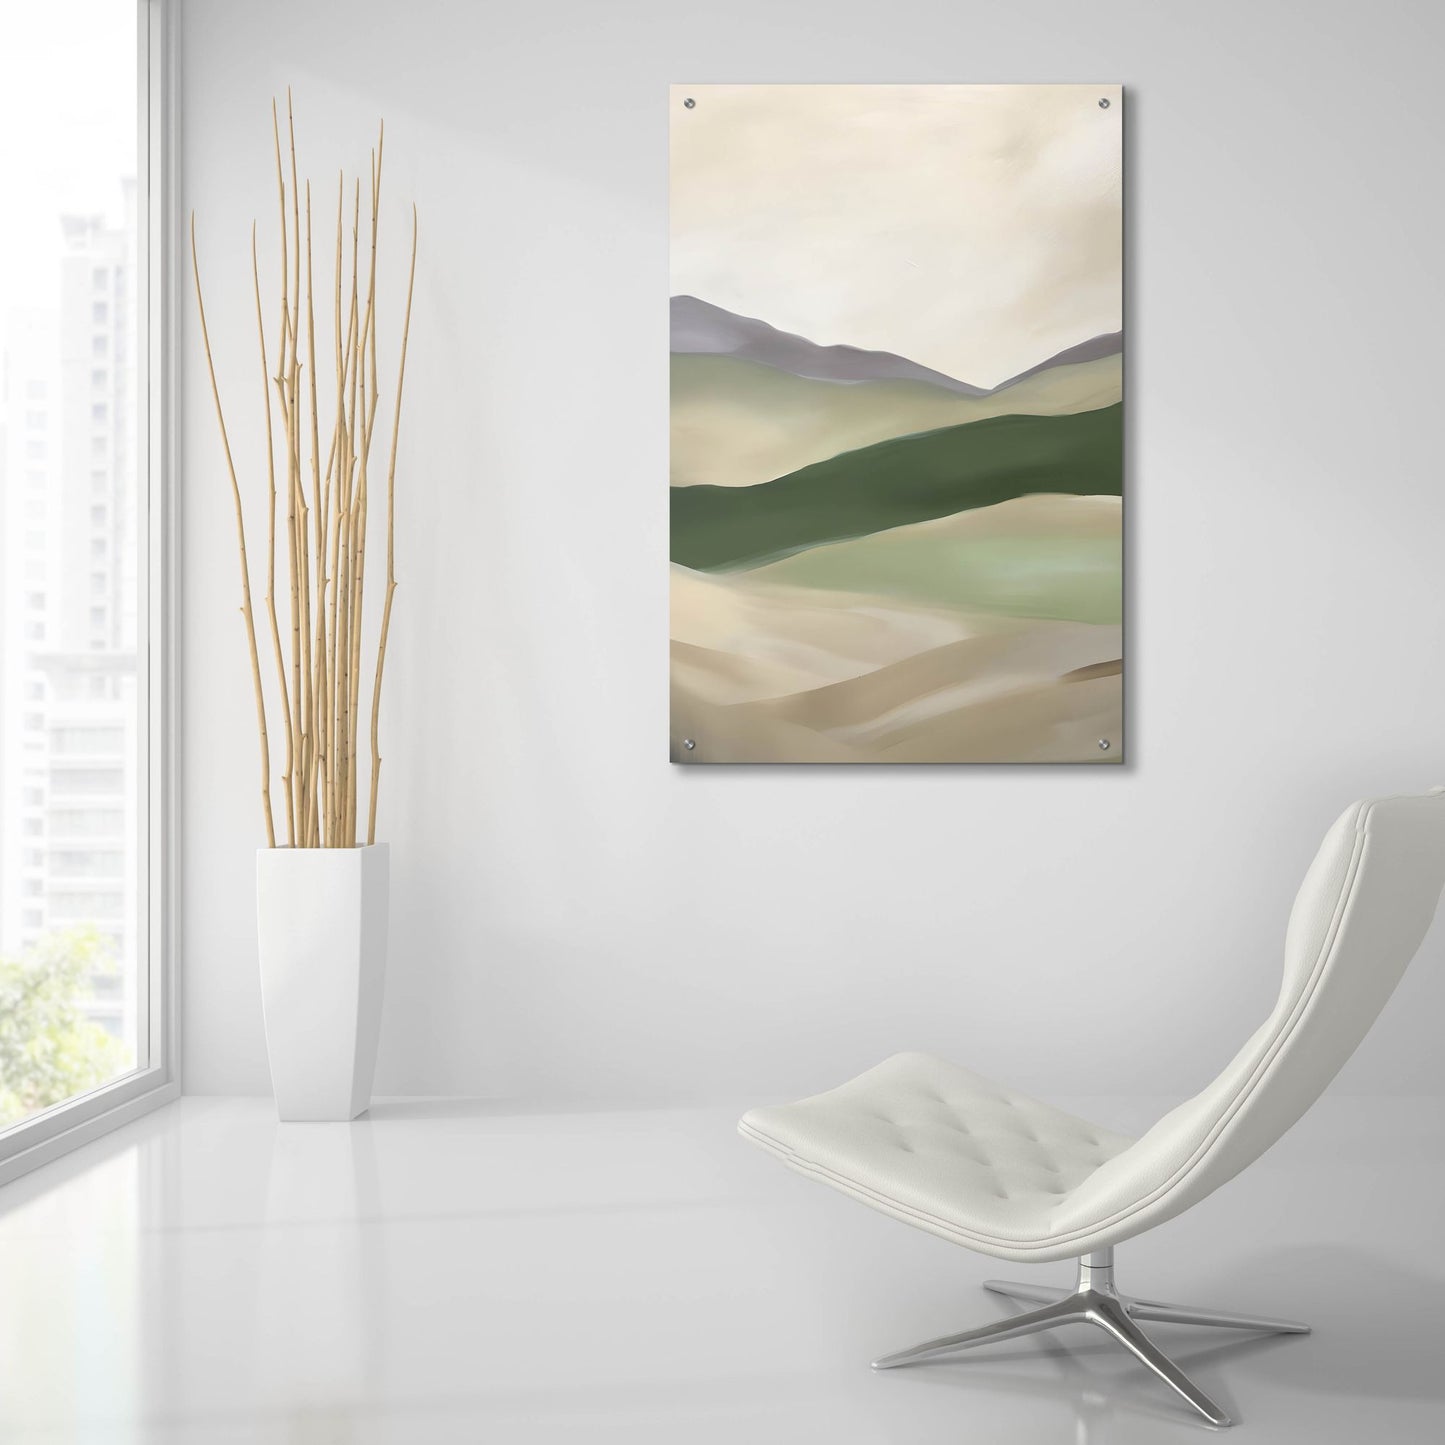 Epic Art 'Abstract Mountain 1' by Petals Prints Design, Acrylic Glass Wall Art,24x36